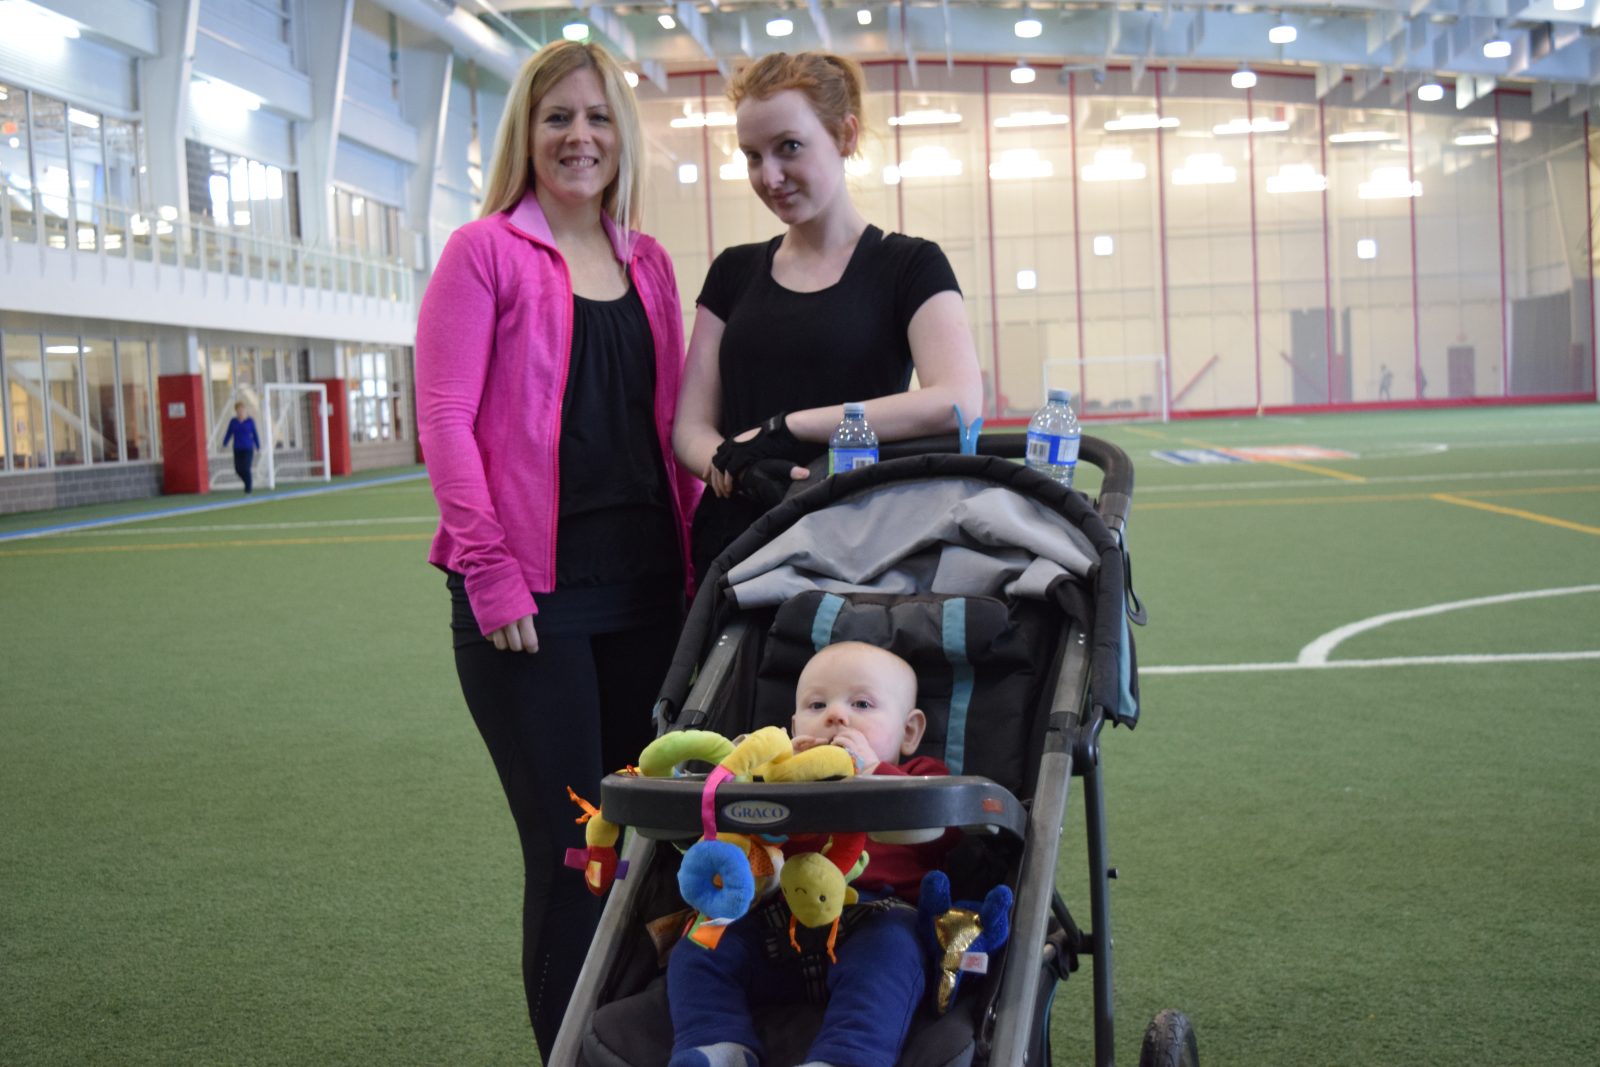 New moms and babies staying fit